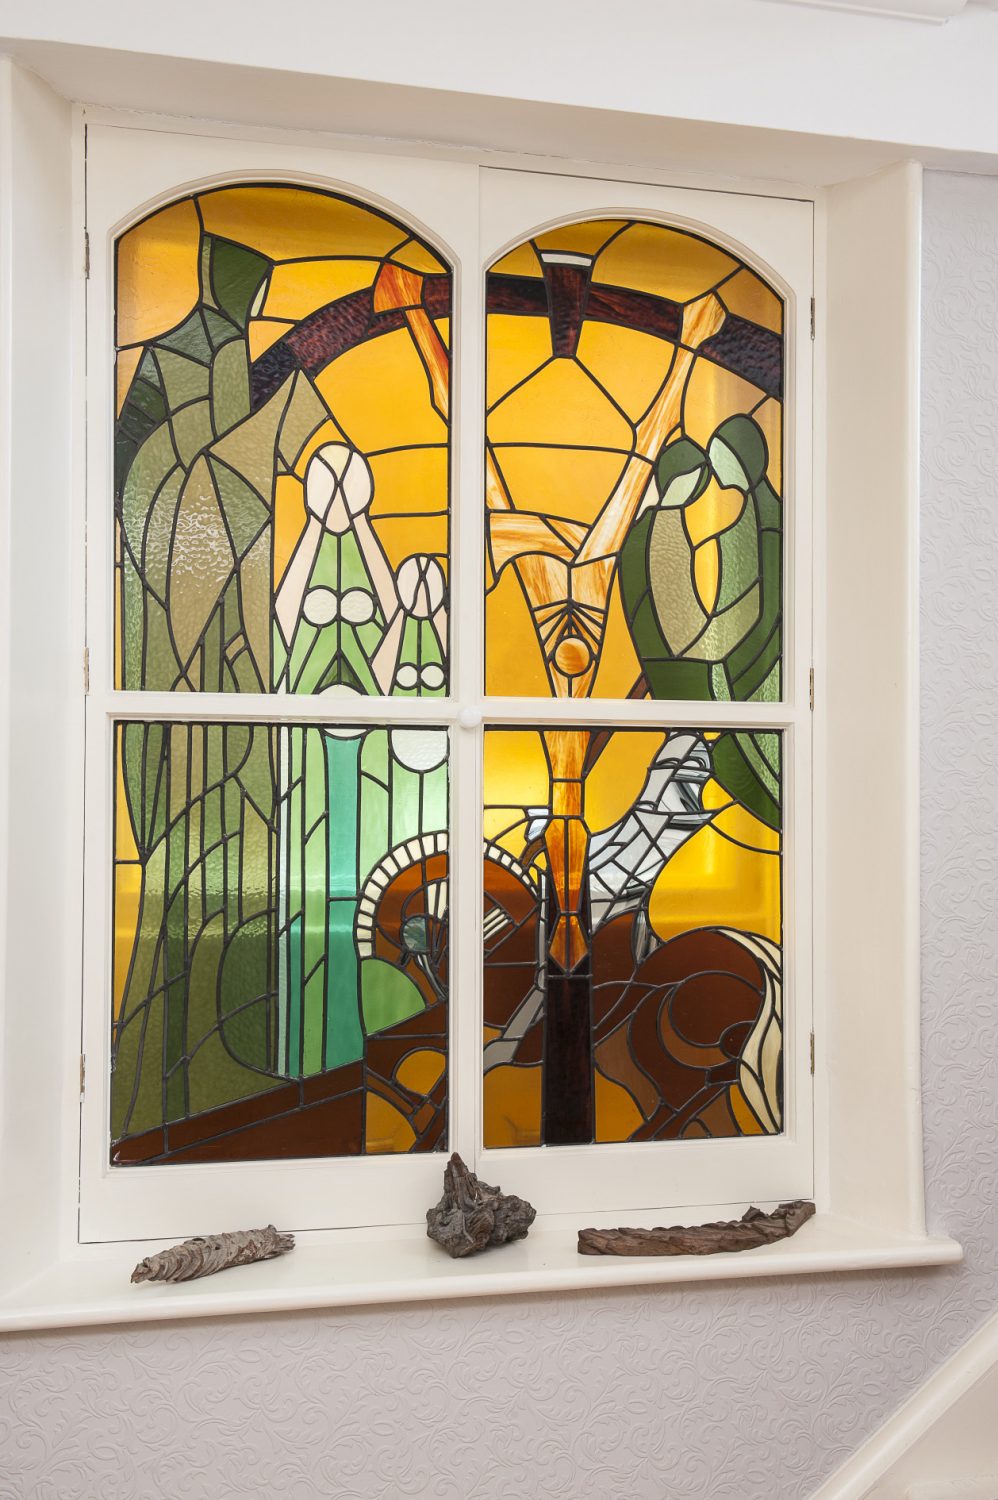 The work of Isobel Ackary is evident in the shape of two lovely stained glass-fronted cabinets and a small basement window